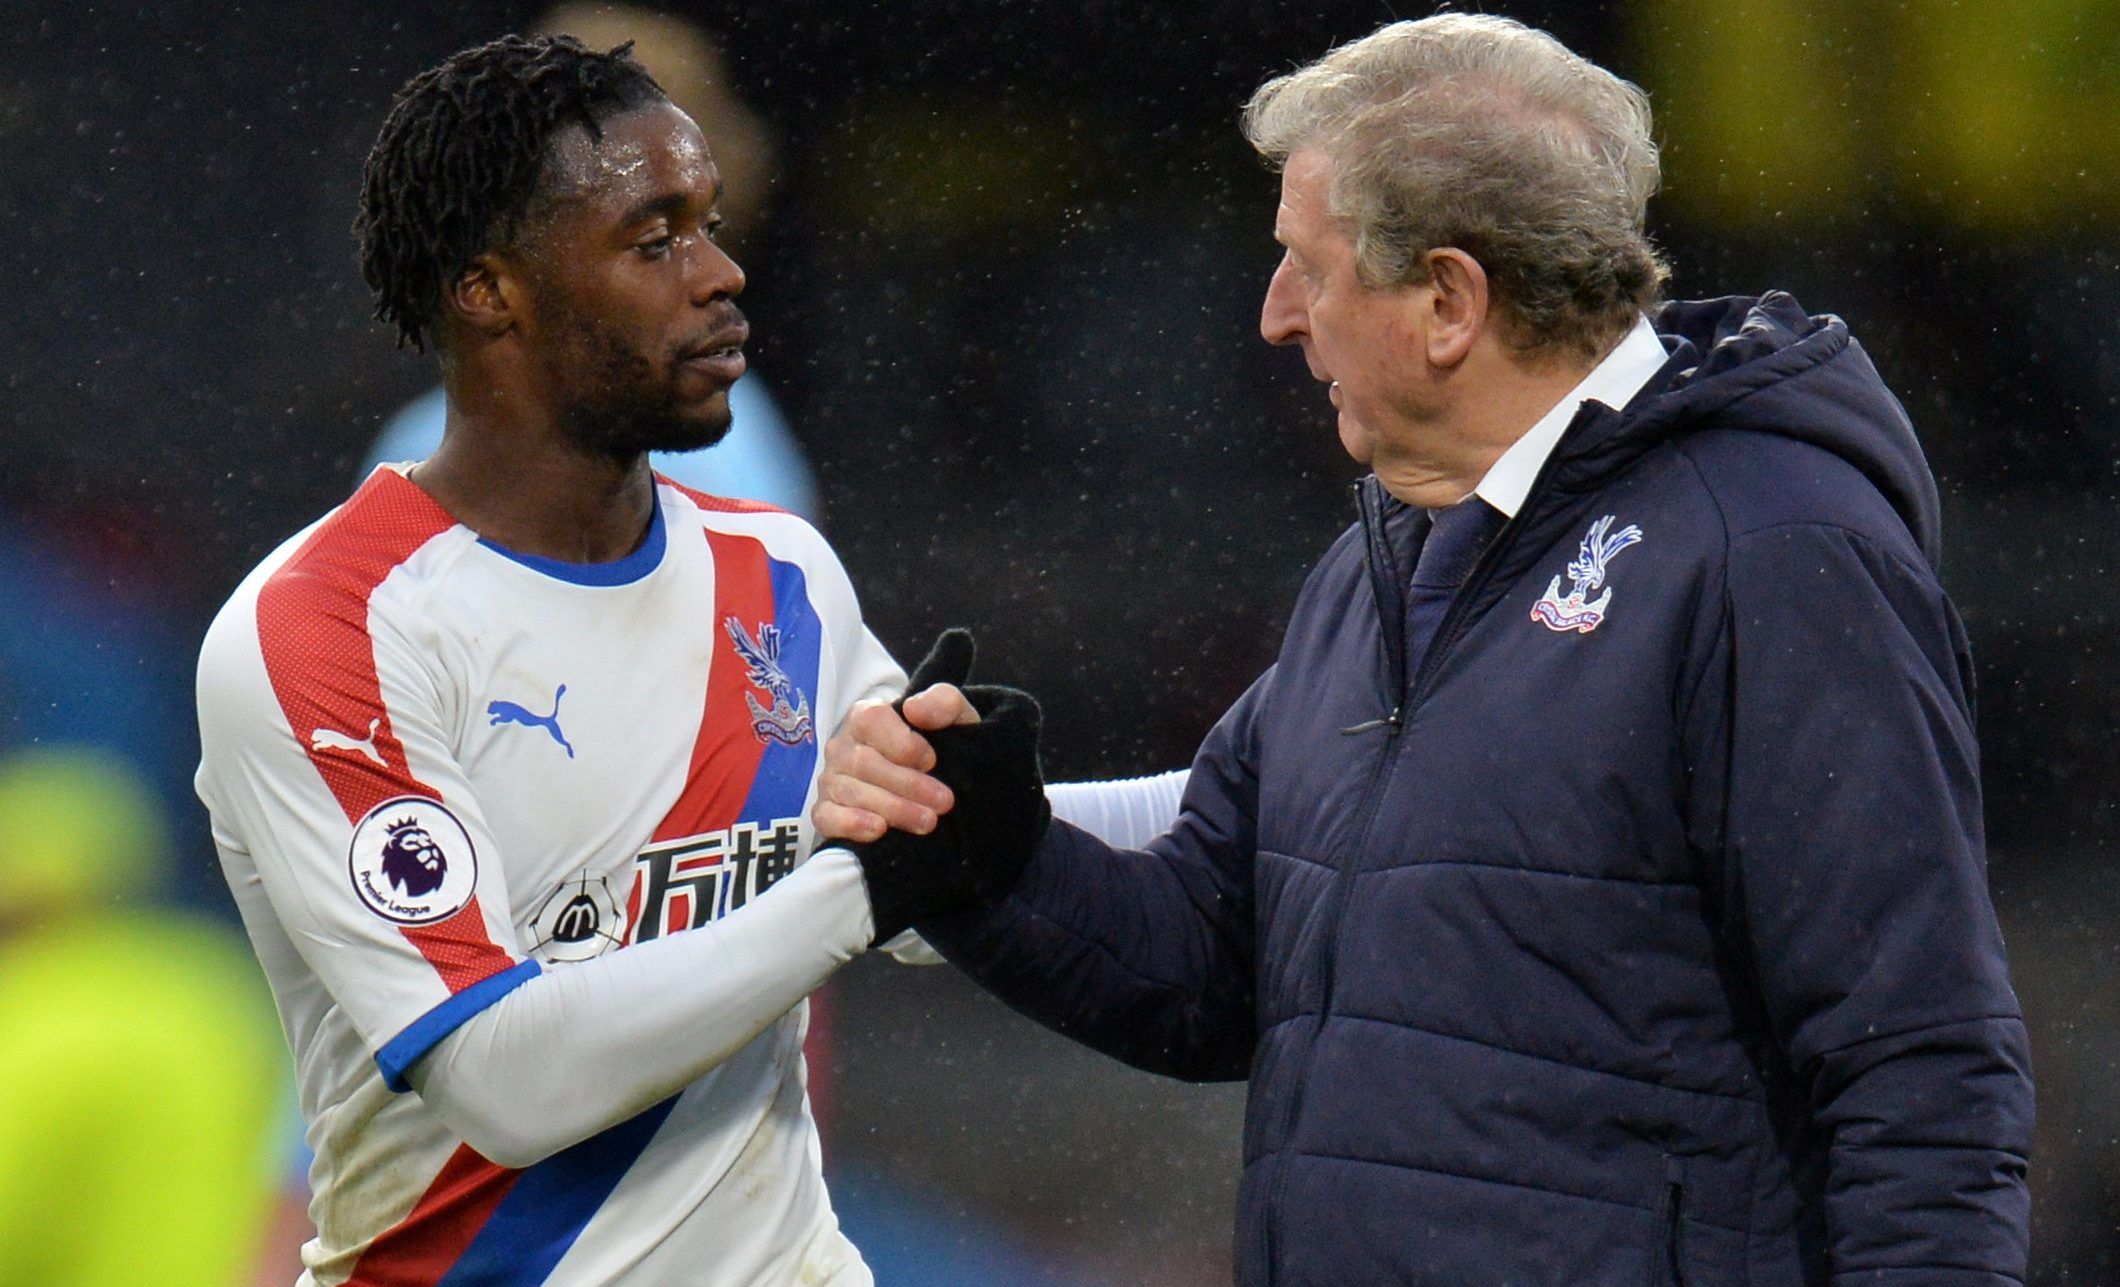 Soccer Football - Premier League - Burnley v Crystal Palace - Turf Moor, Burnley, Britain - March 2, 2019  Crystal Palace manager Roy Hodgson shakes hands with Jeffrey Schlupp at the end of the match   REUTERS/Peter Powell  EDITORIAL USE ONLY. No use with unauthorized audio, video, data, fixture lists, club/league logos or 